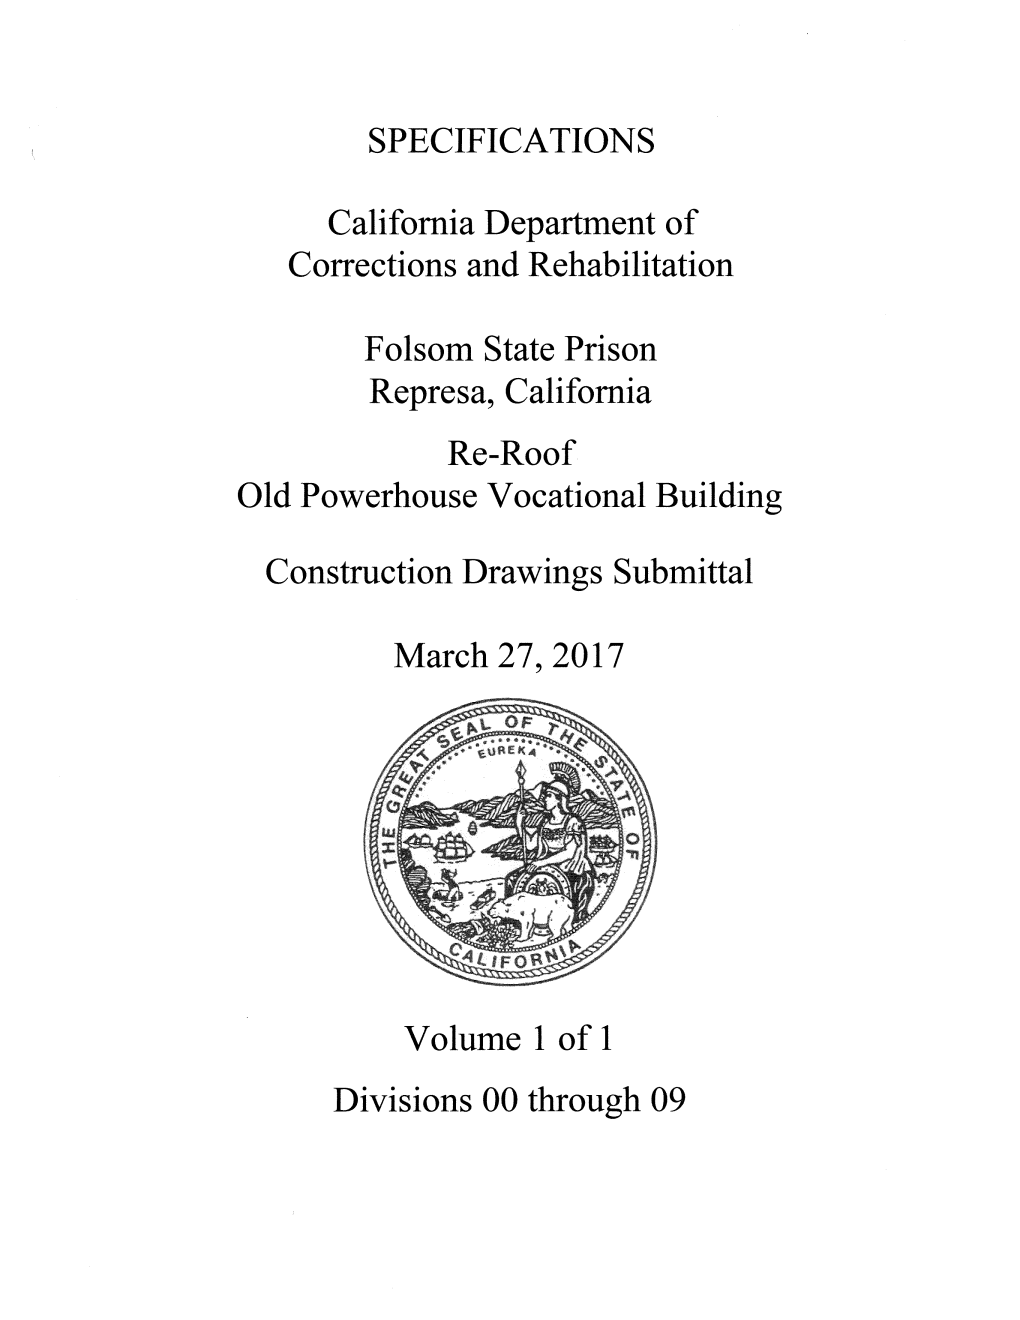 SPECIFICATIONS California Department of Corrections and Rehabilitation Folsom State Prison Represa, California Re-Roof Old Power